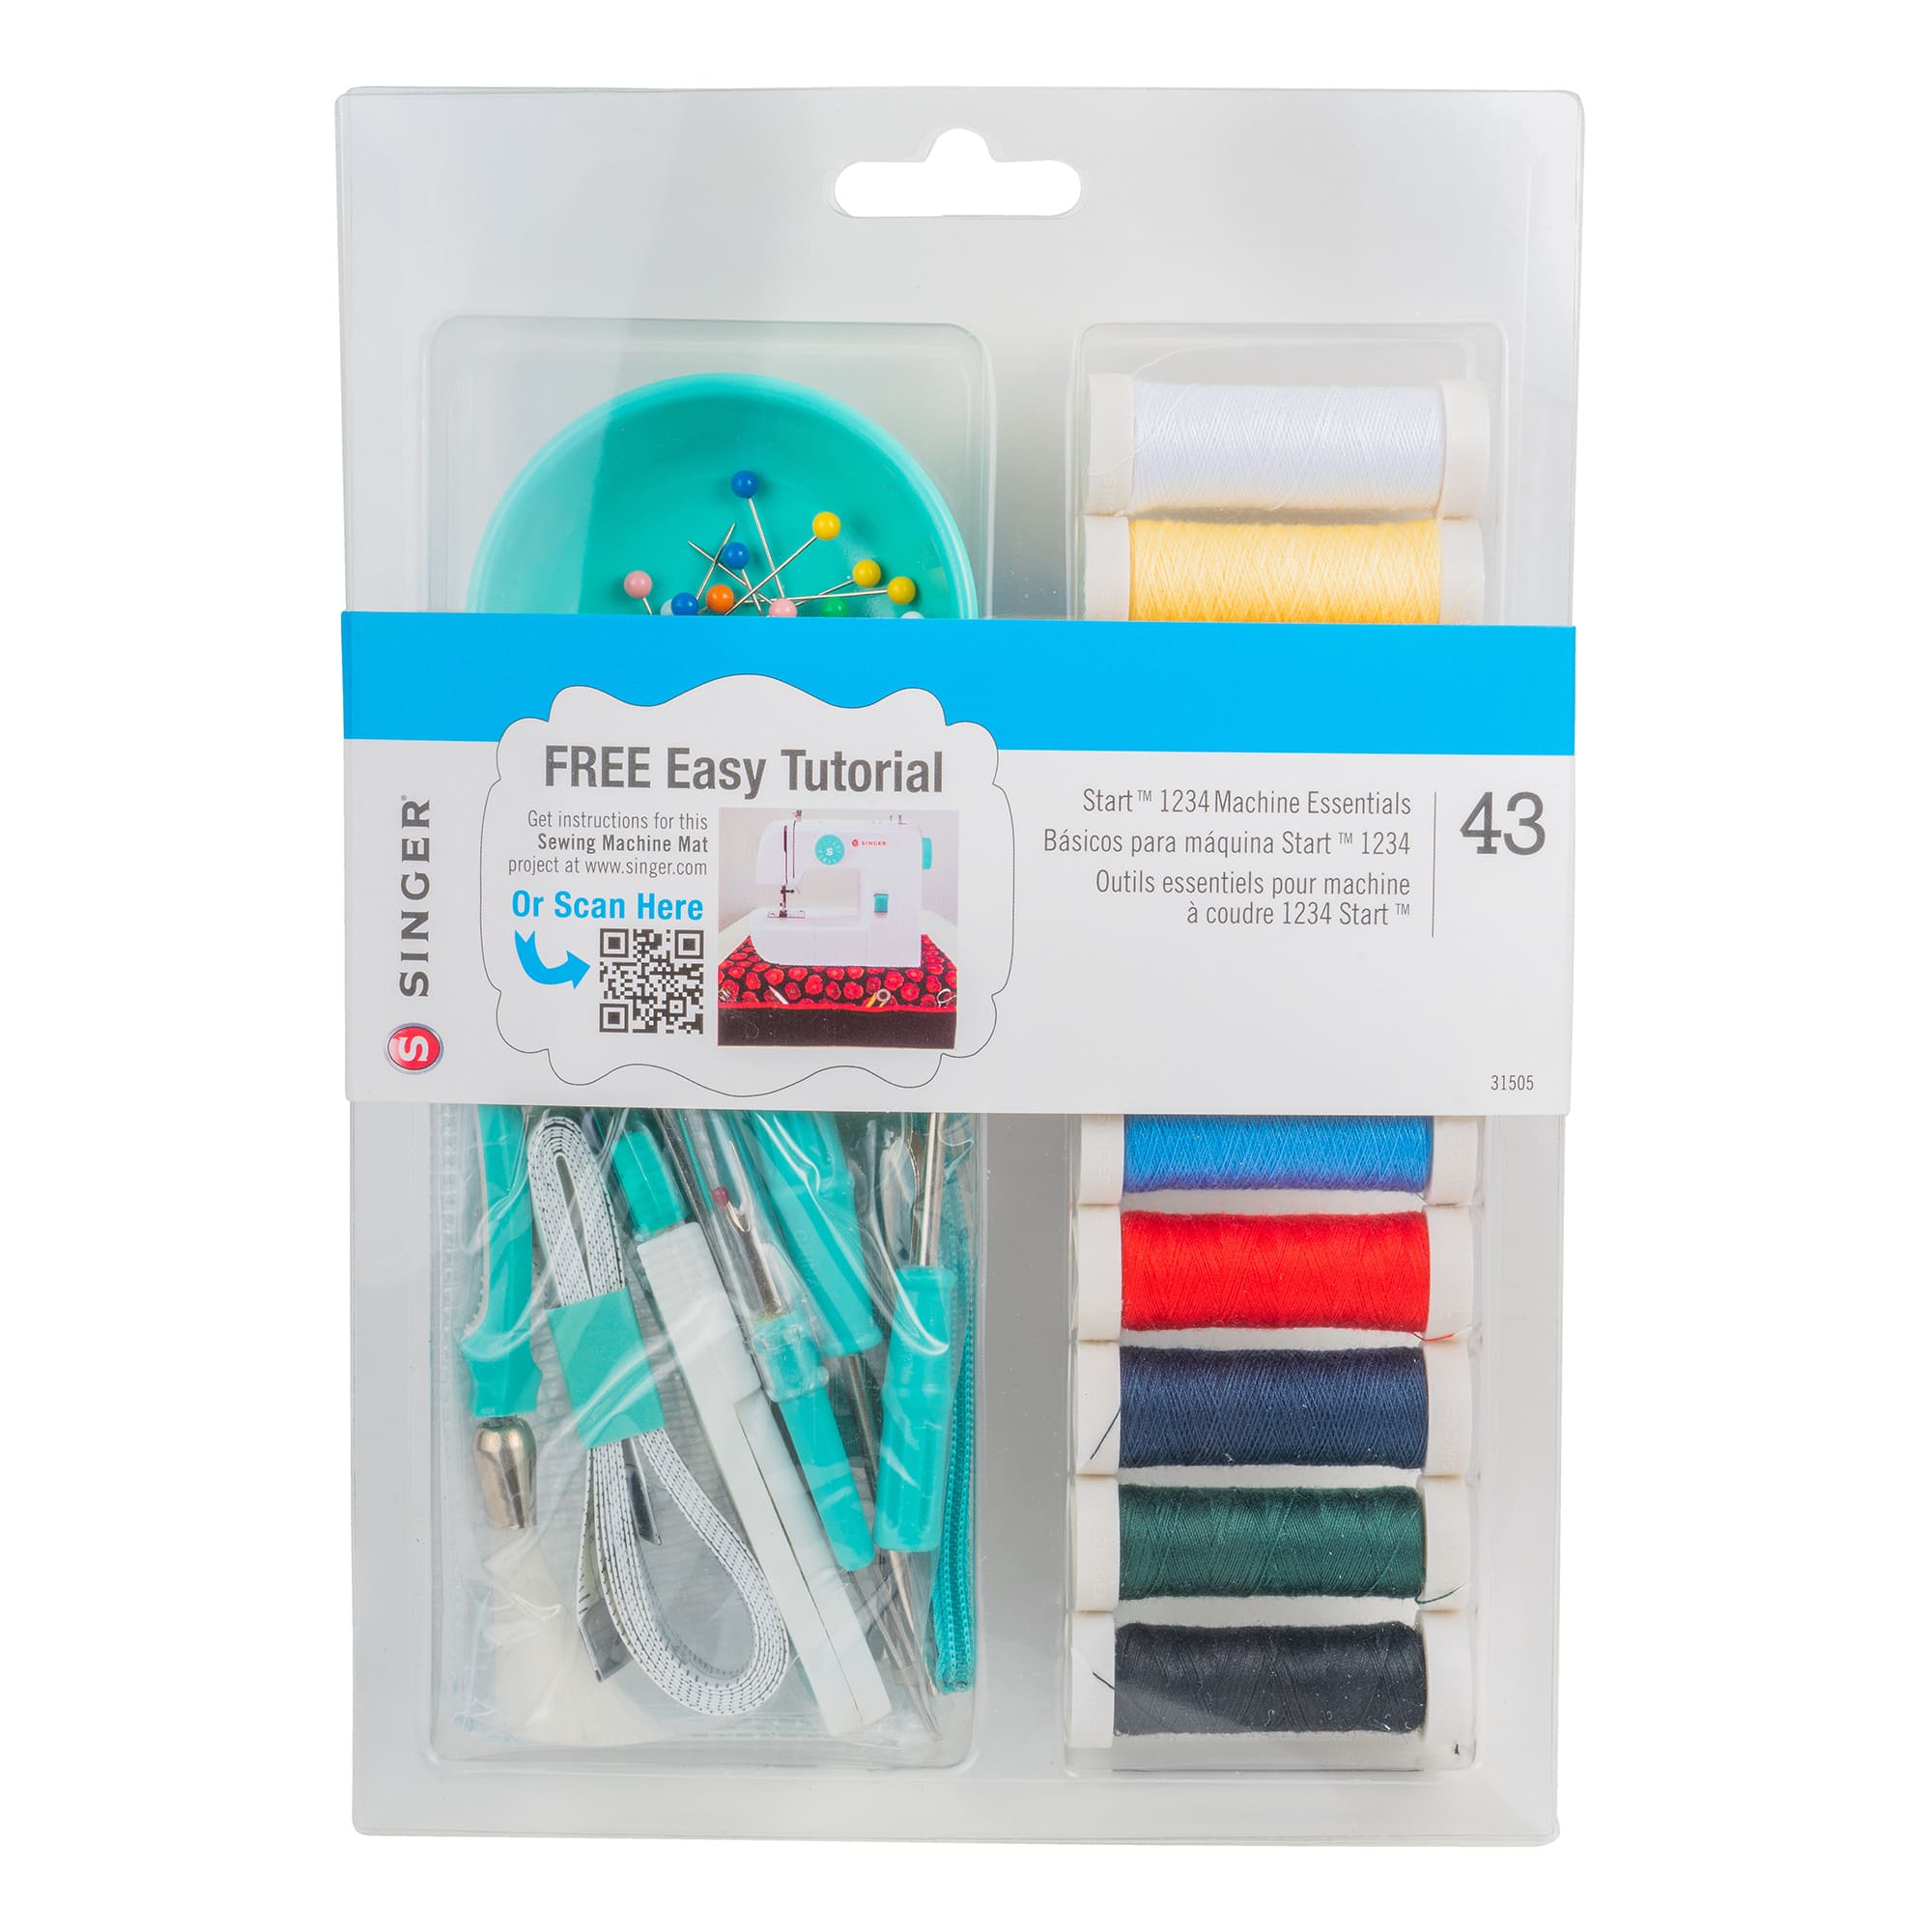 Basic Sewing Kit: The Essentials